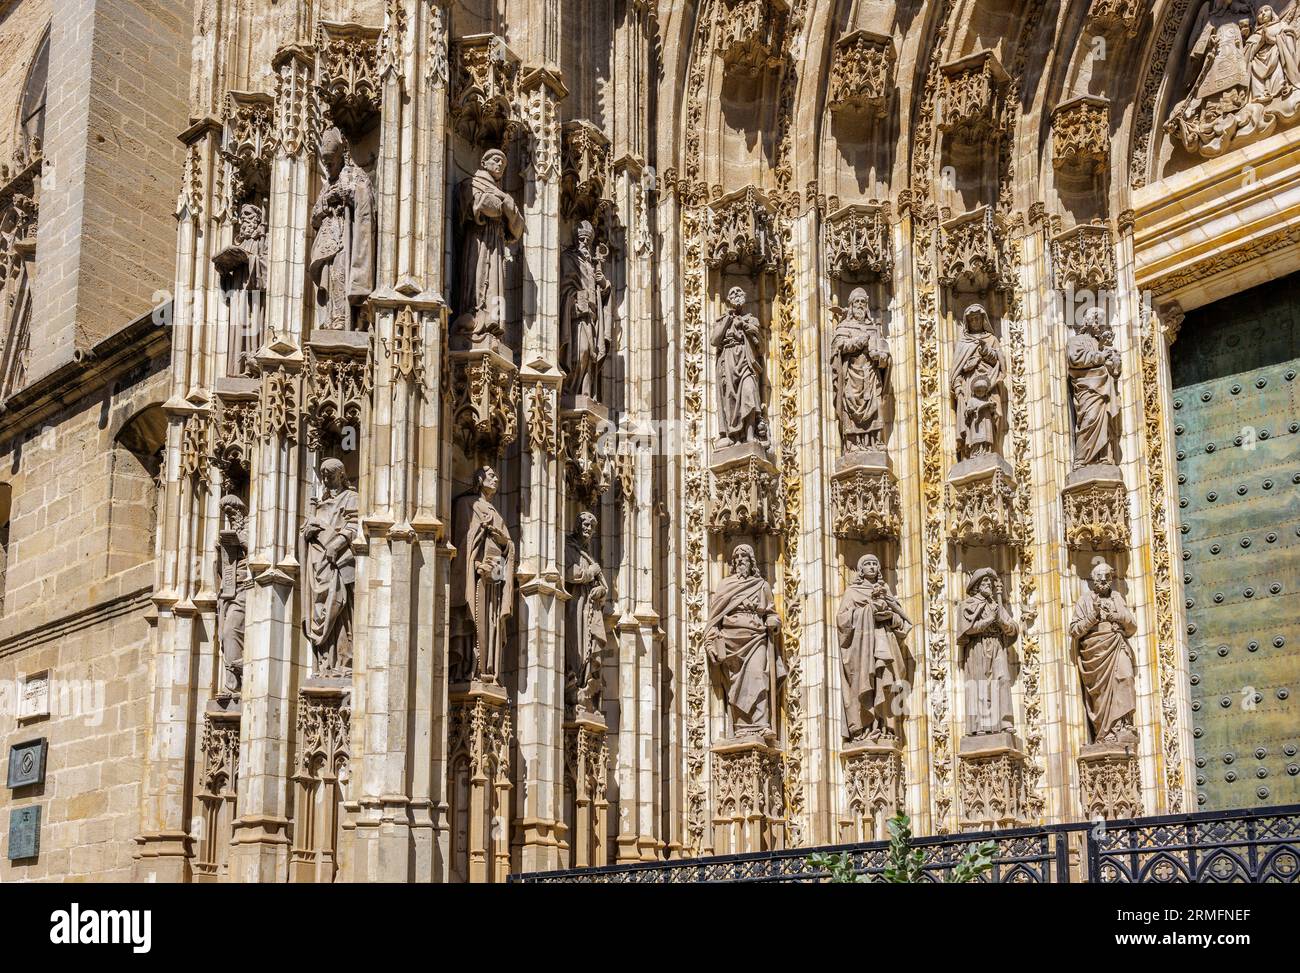 Sculptures of apostles and saints located in the niches on a side of the Puerta de la Asuncion gate, the main entrance to the Seville Cathedral. Spain Stock Photo